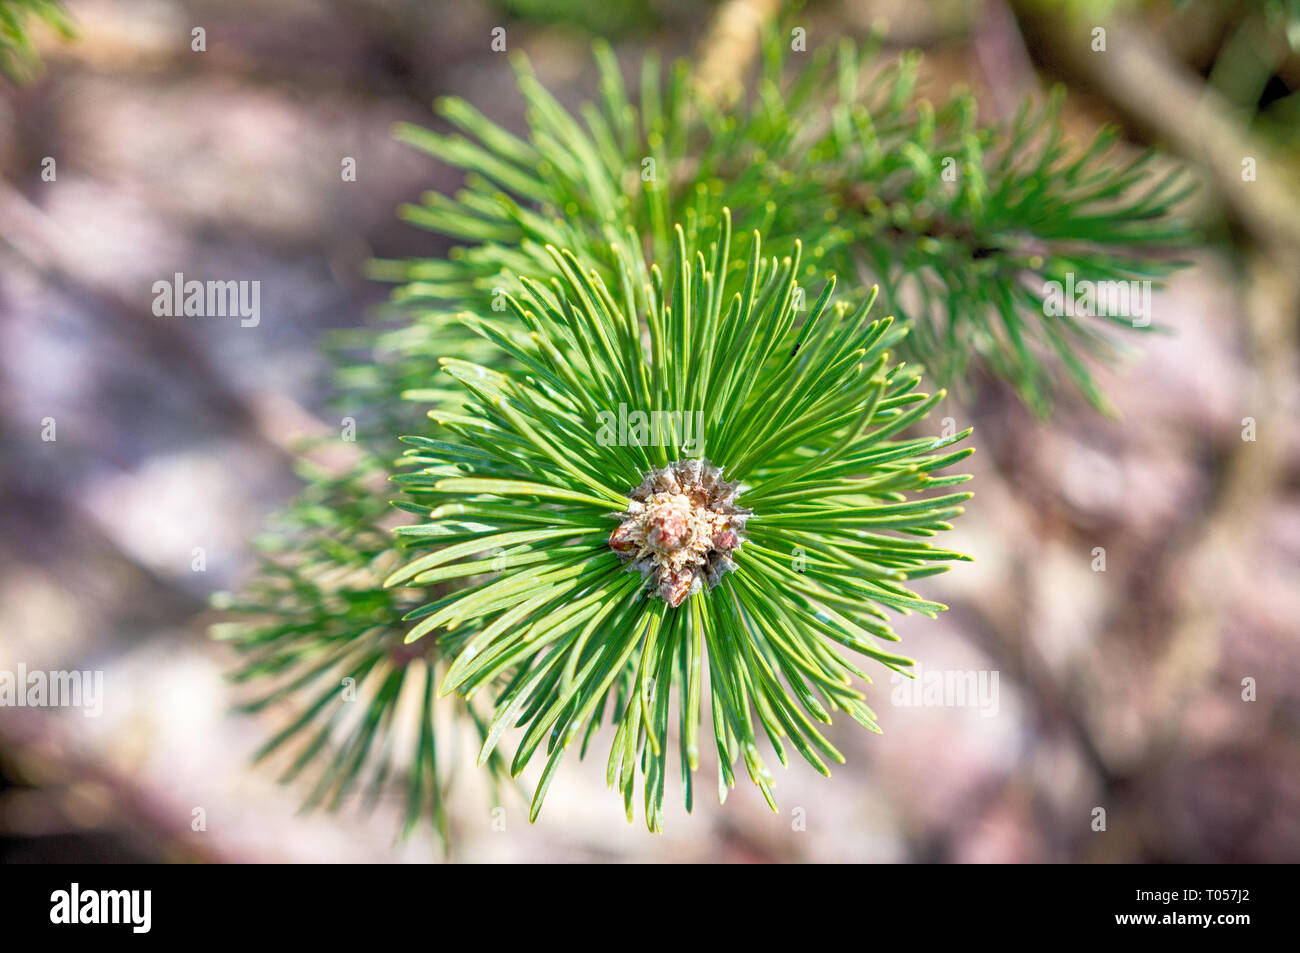 View of top of pine tree with pine leaf, green pine cones and branch Stock Photo